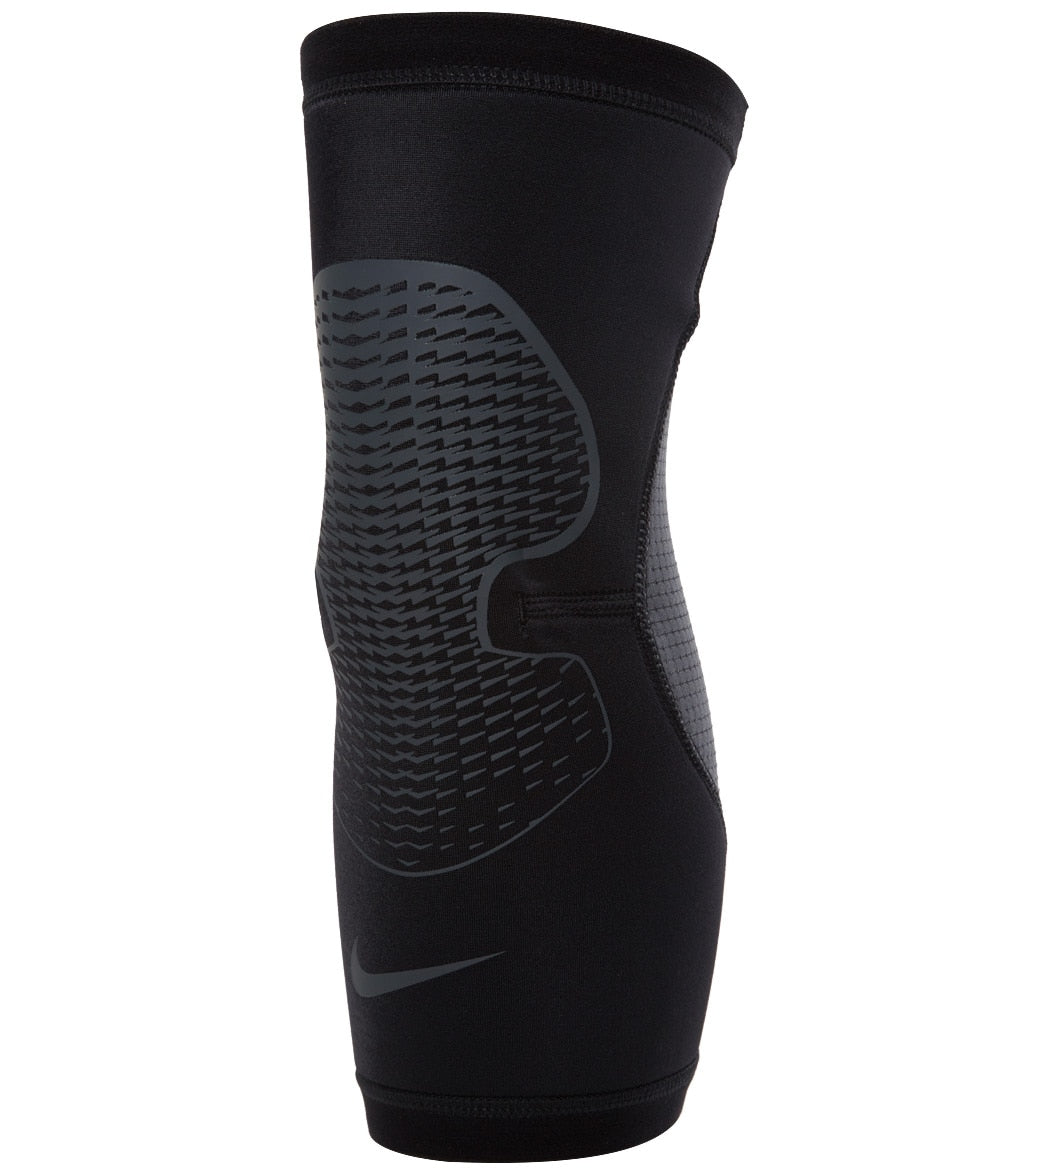 Pro Hyperstrong Knee 3.0 at SwimOutlet.com